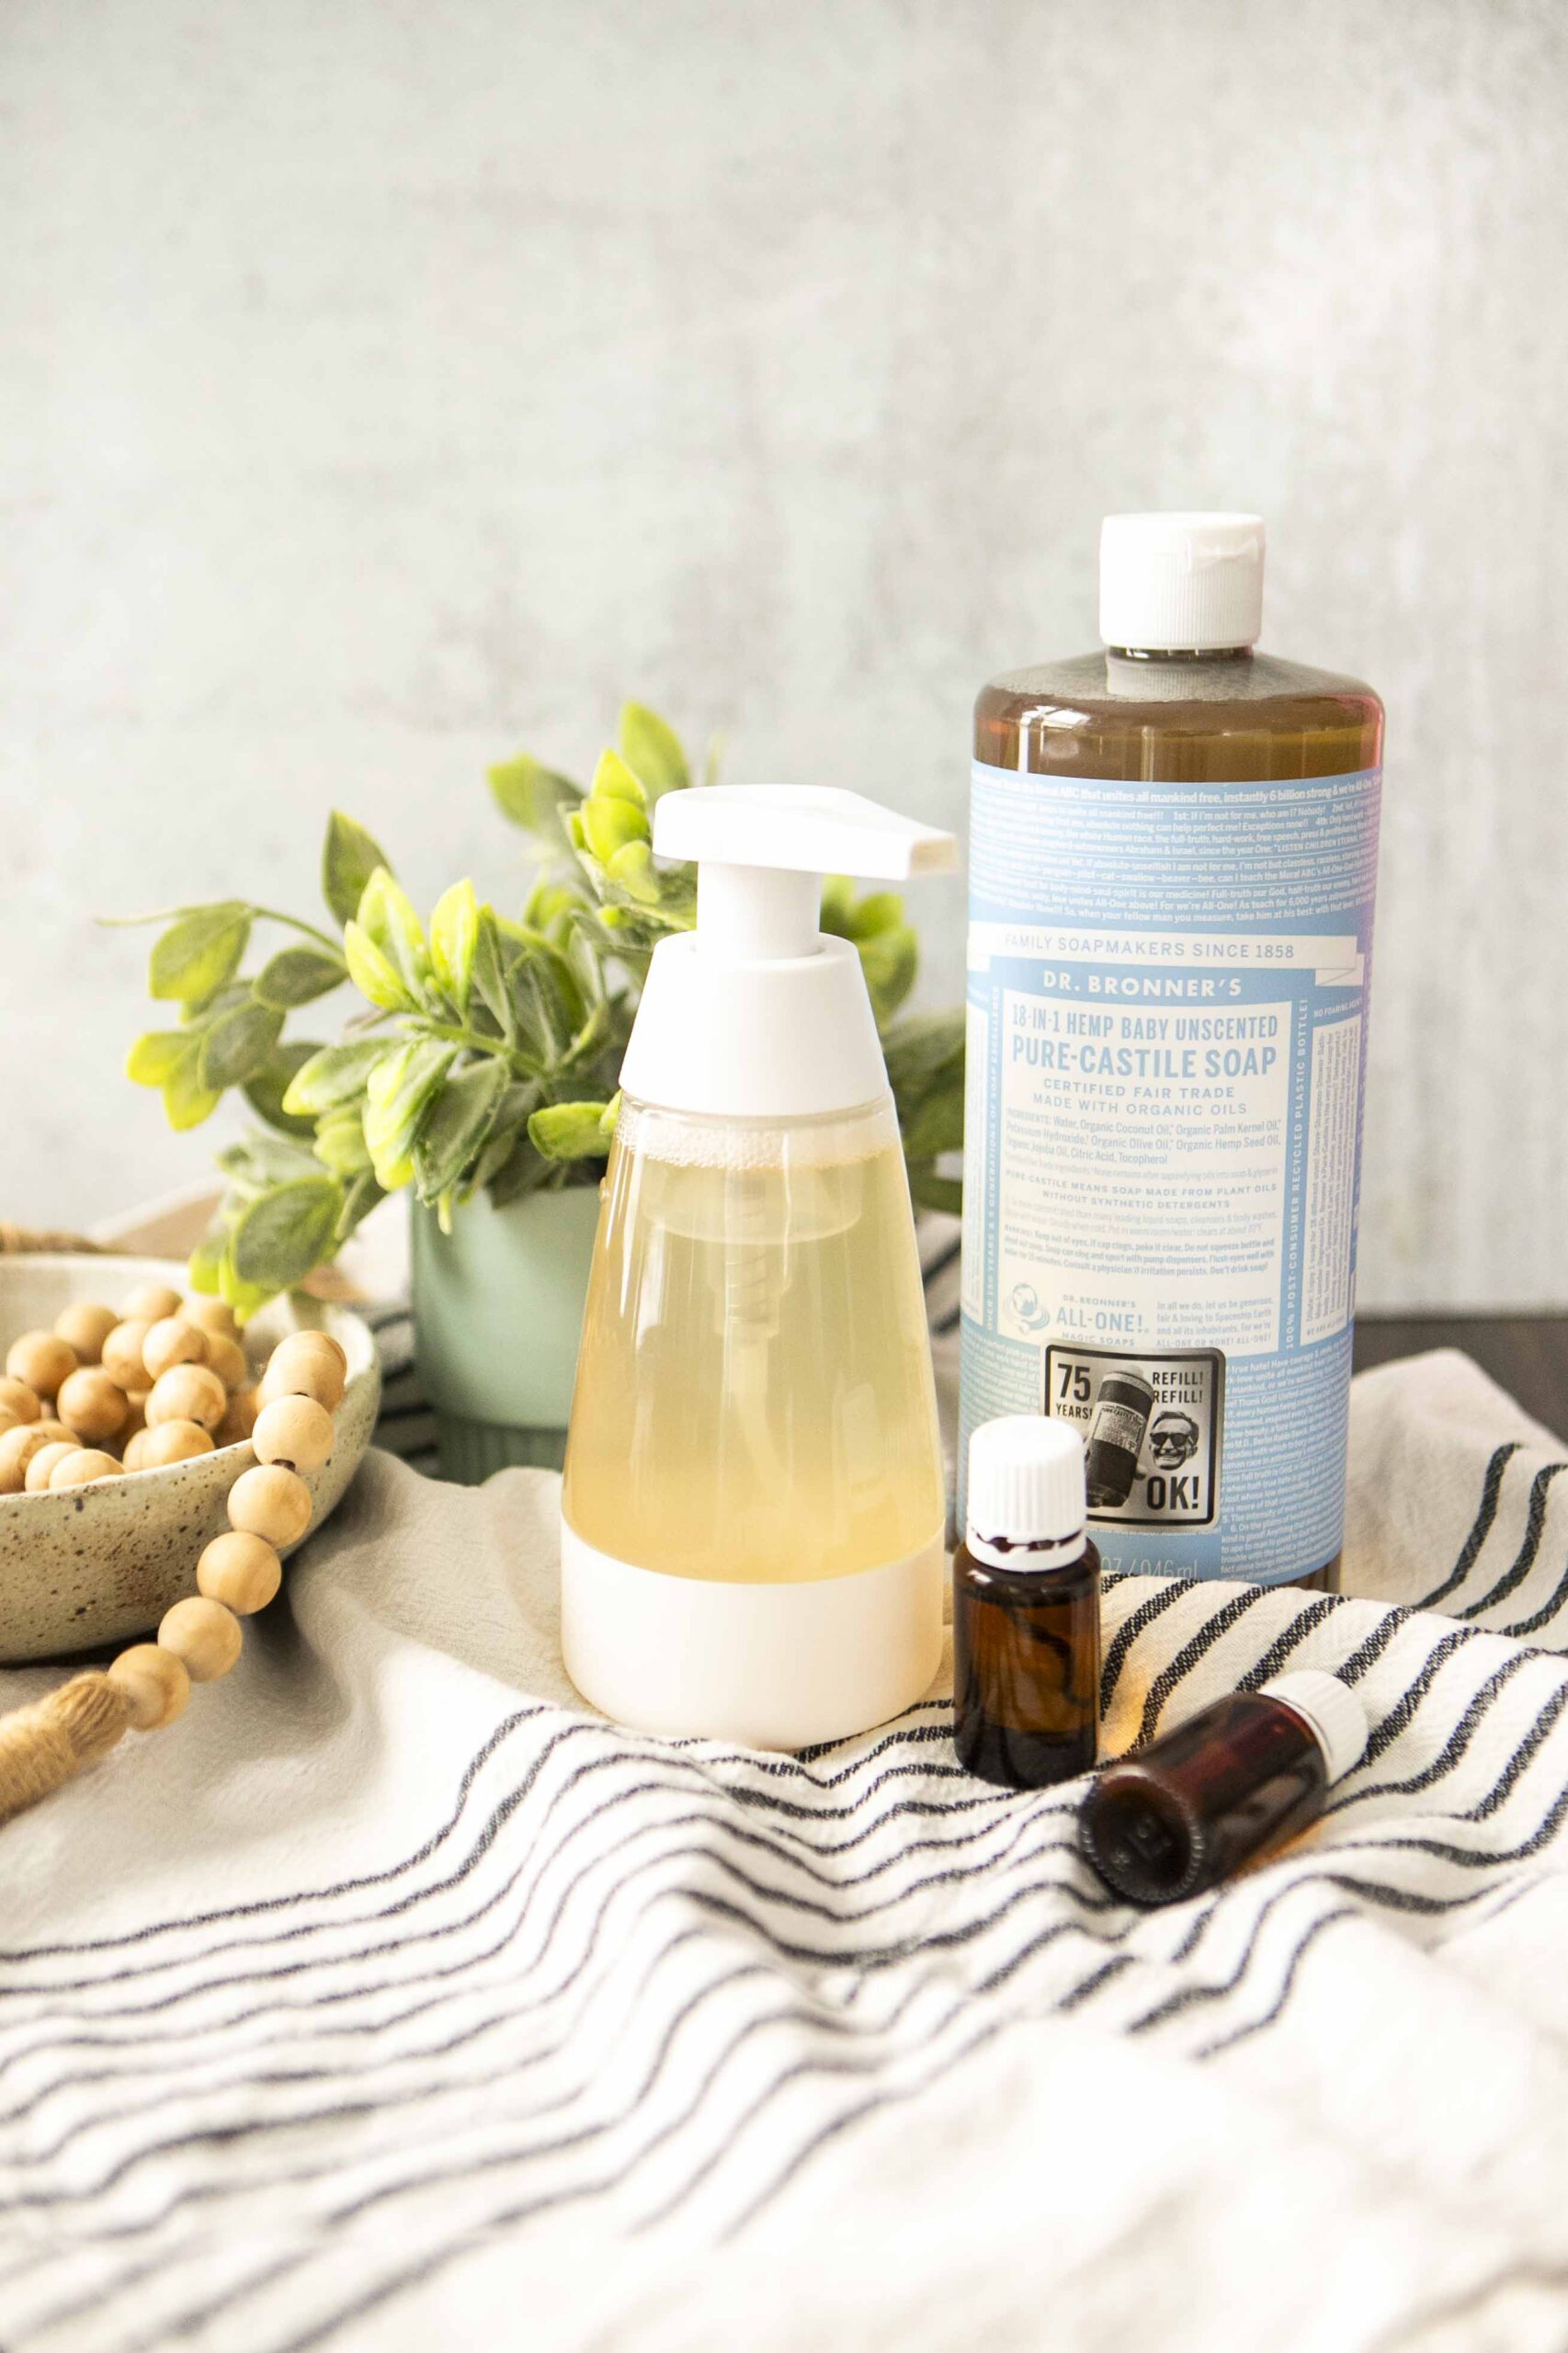 How to Make Foaming Hand Soap